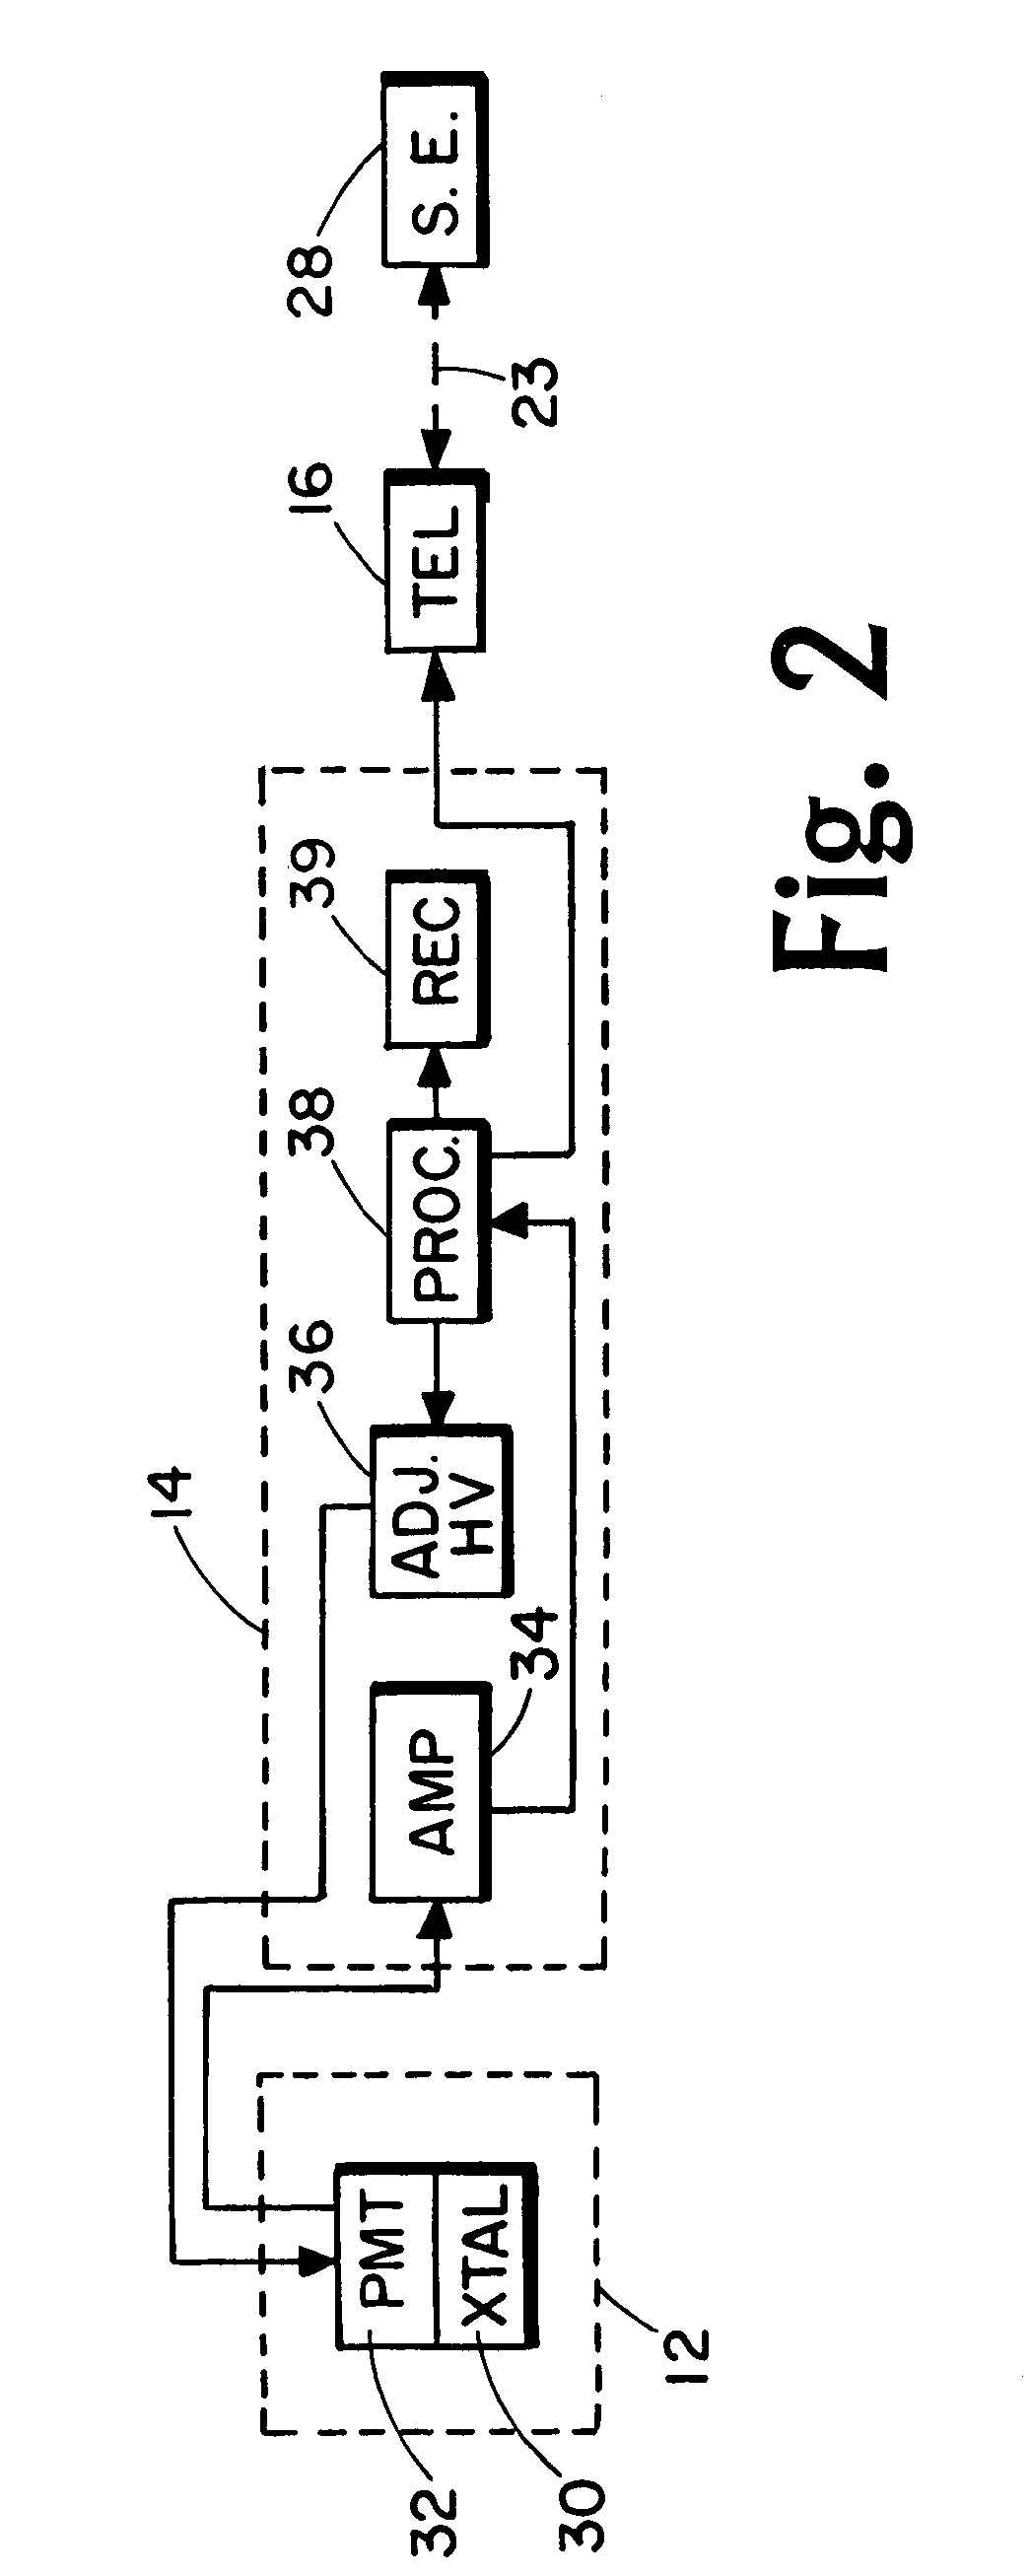 Gain stabilization apparatus and methods for spectral gamma ray measurement systems